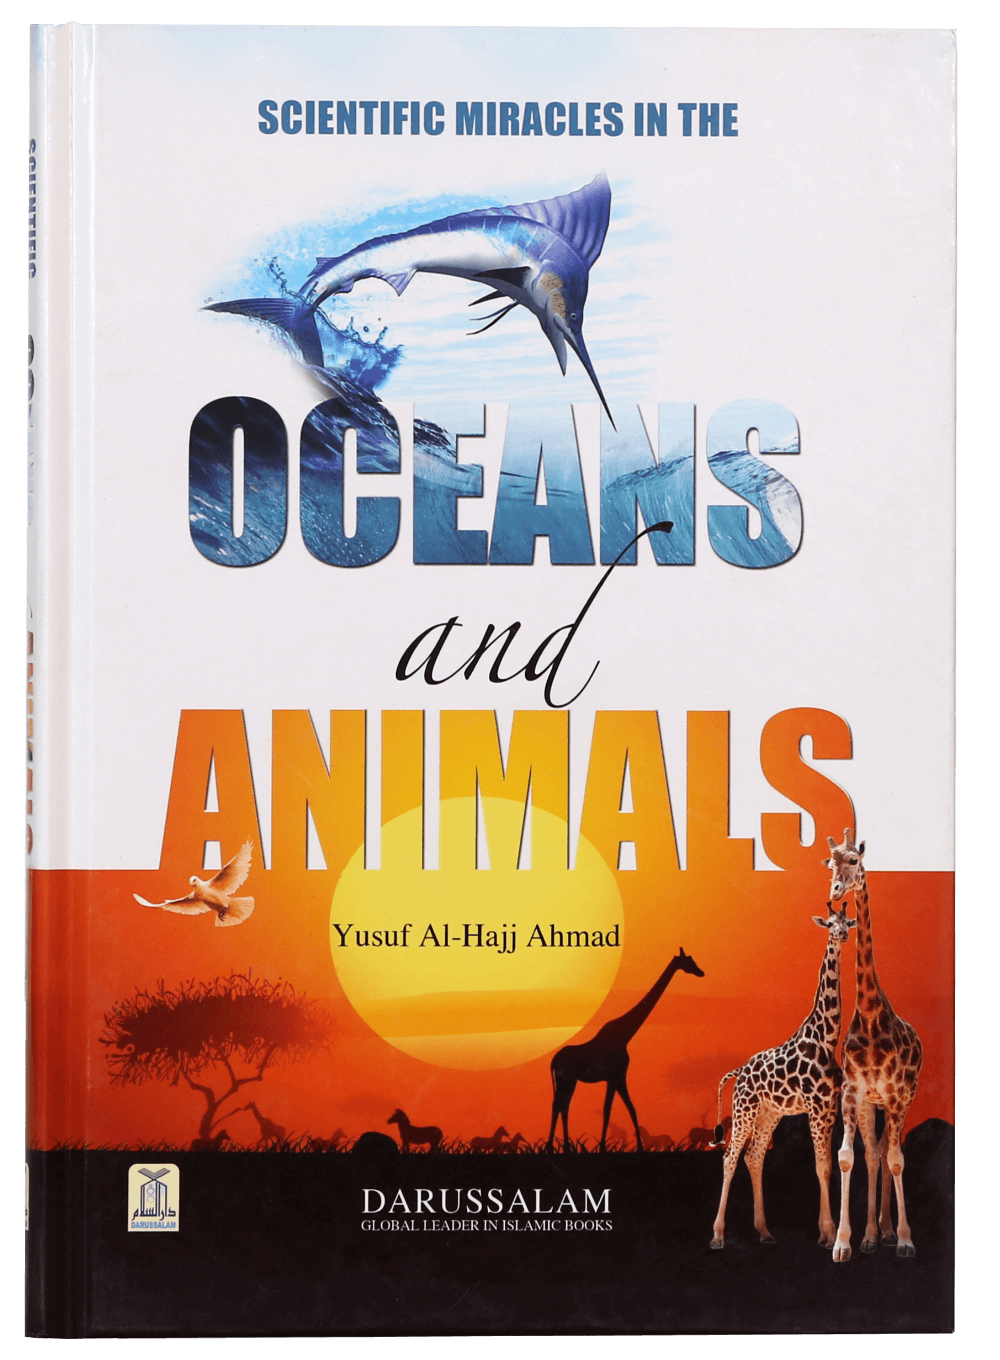 scientific-miracles-in-oceans-and-animal-darussalam-20180321-164248